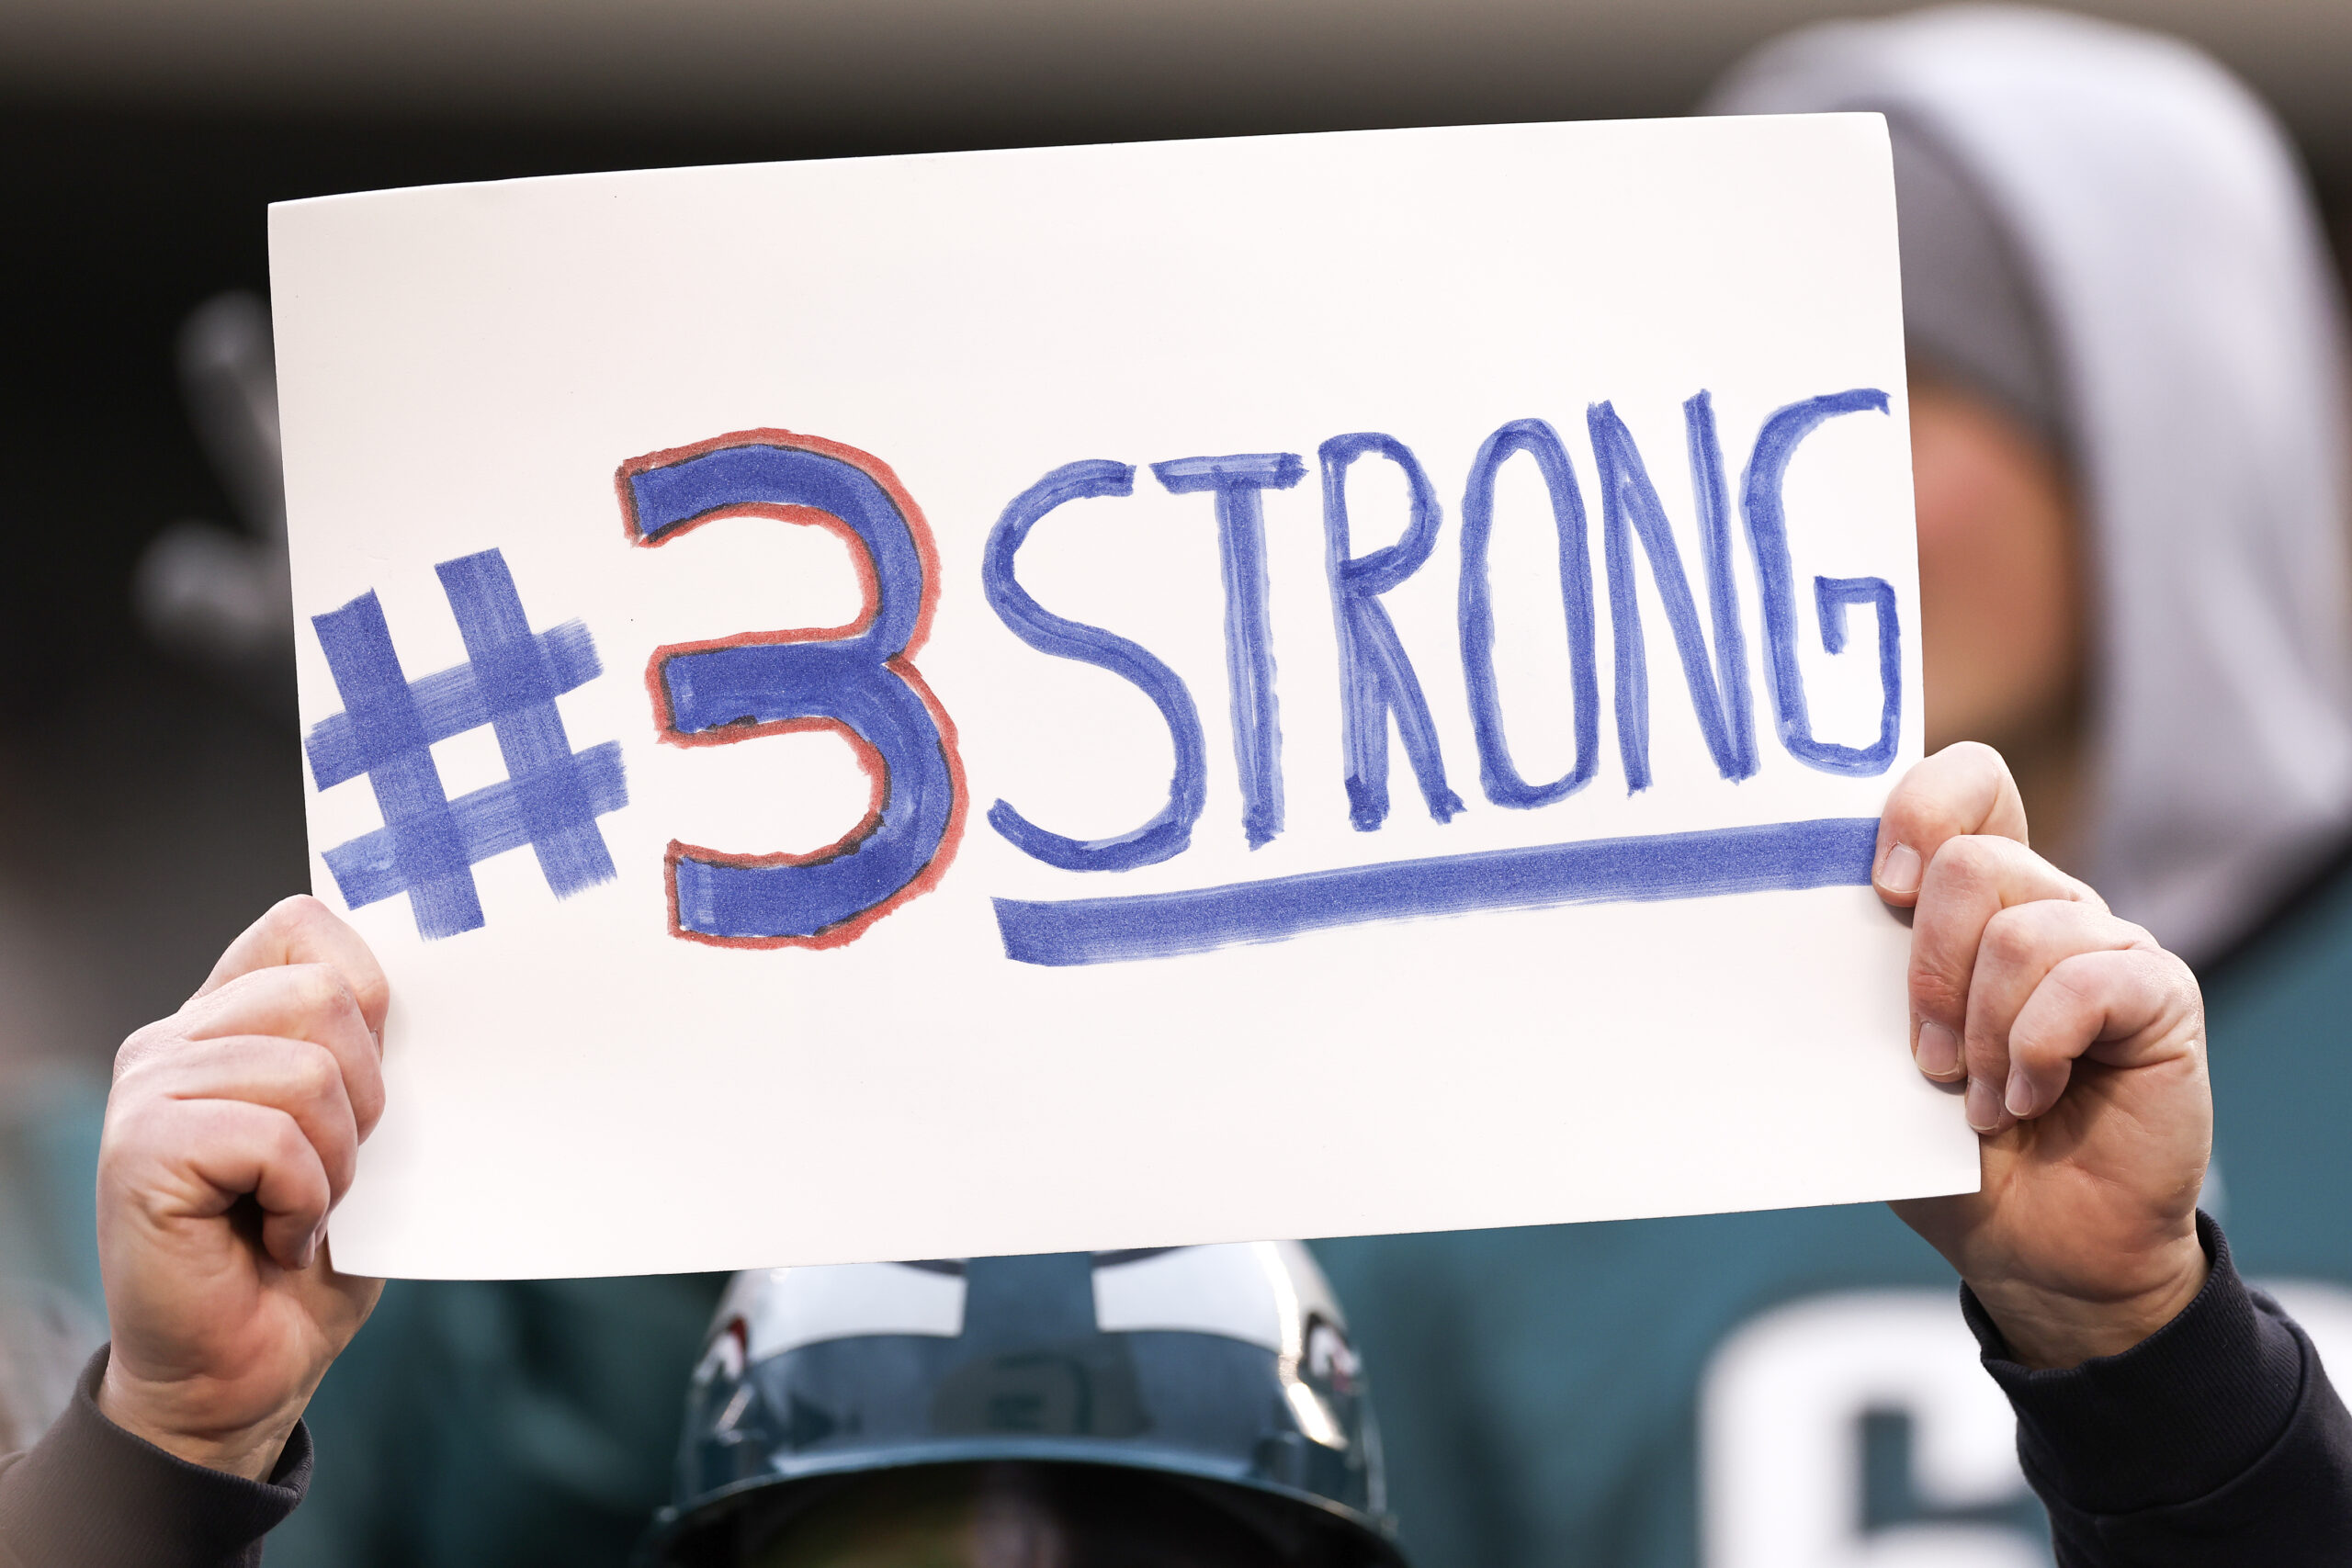 PHILADELPHIA, PENNSYLVANIA - JANUARY 08: A fan displays a sign for Damar Hamlin #3 of the Buffalo Bills during a game between the Philadelphia Eagles and the New York Giants at Lincoln Financial Field on January 08, 2023 in Philadelphia, Pennsylvania. (Photo by Tim Nwachukwu/Getty Images)